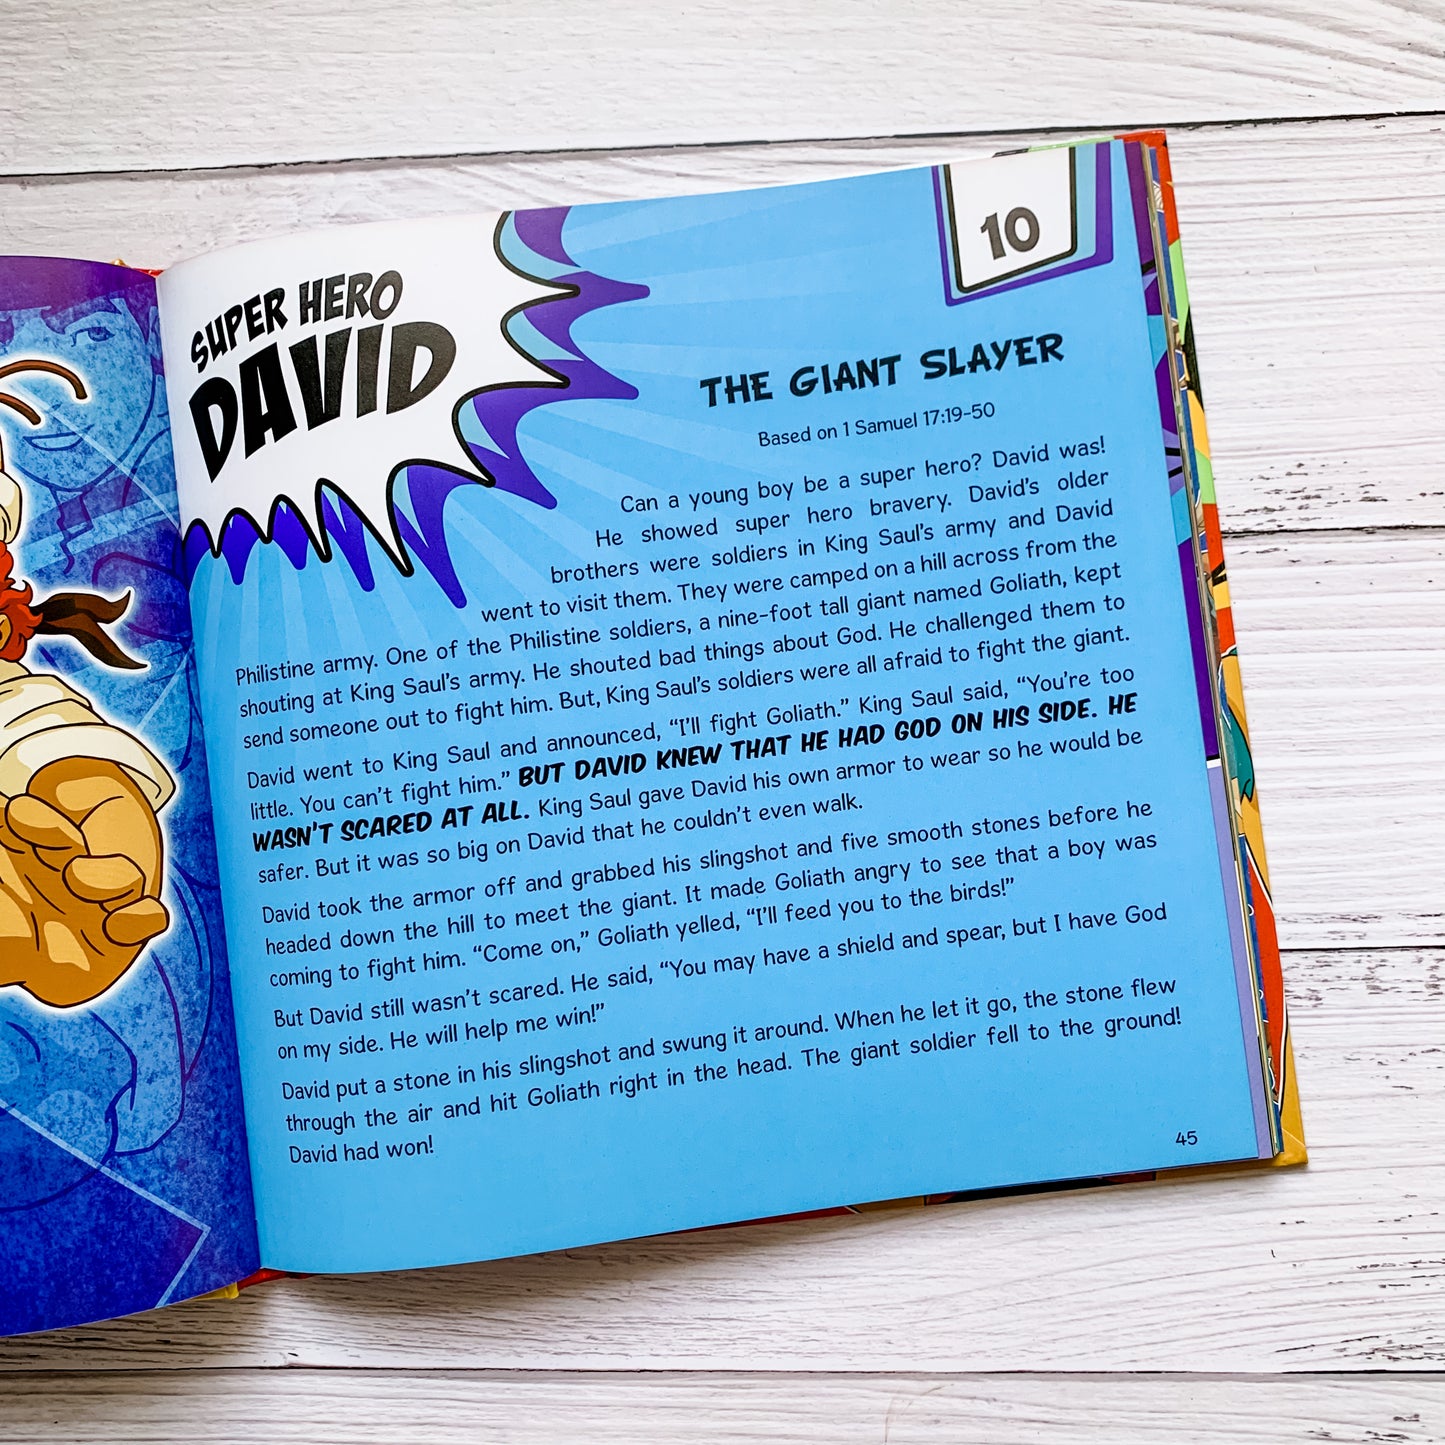 Super Heroes Storybook: Strong and brave Bible heroes who changed the world for Jesus